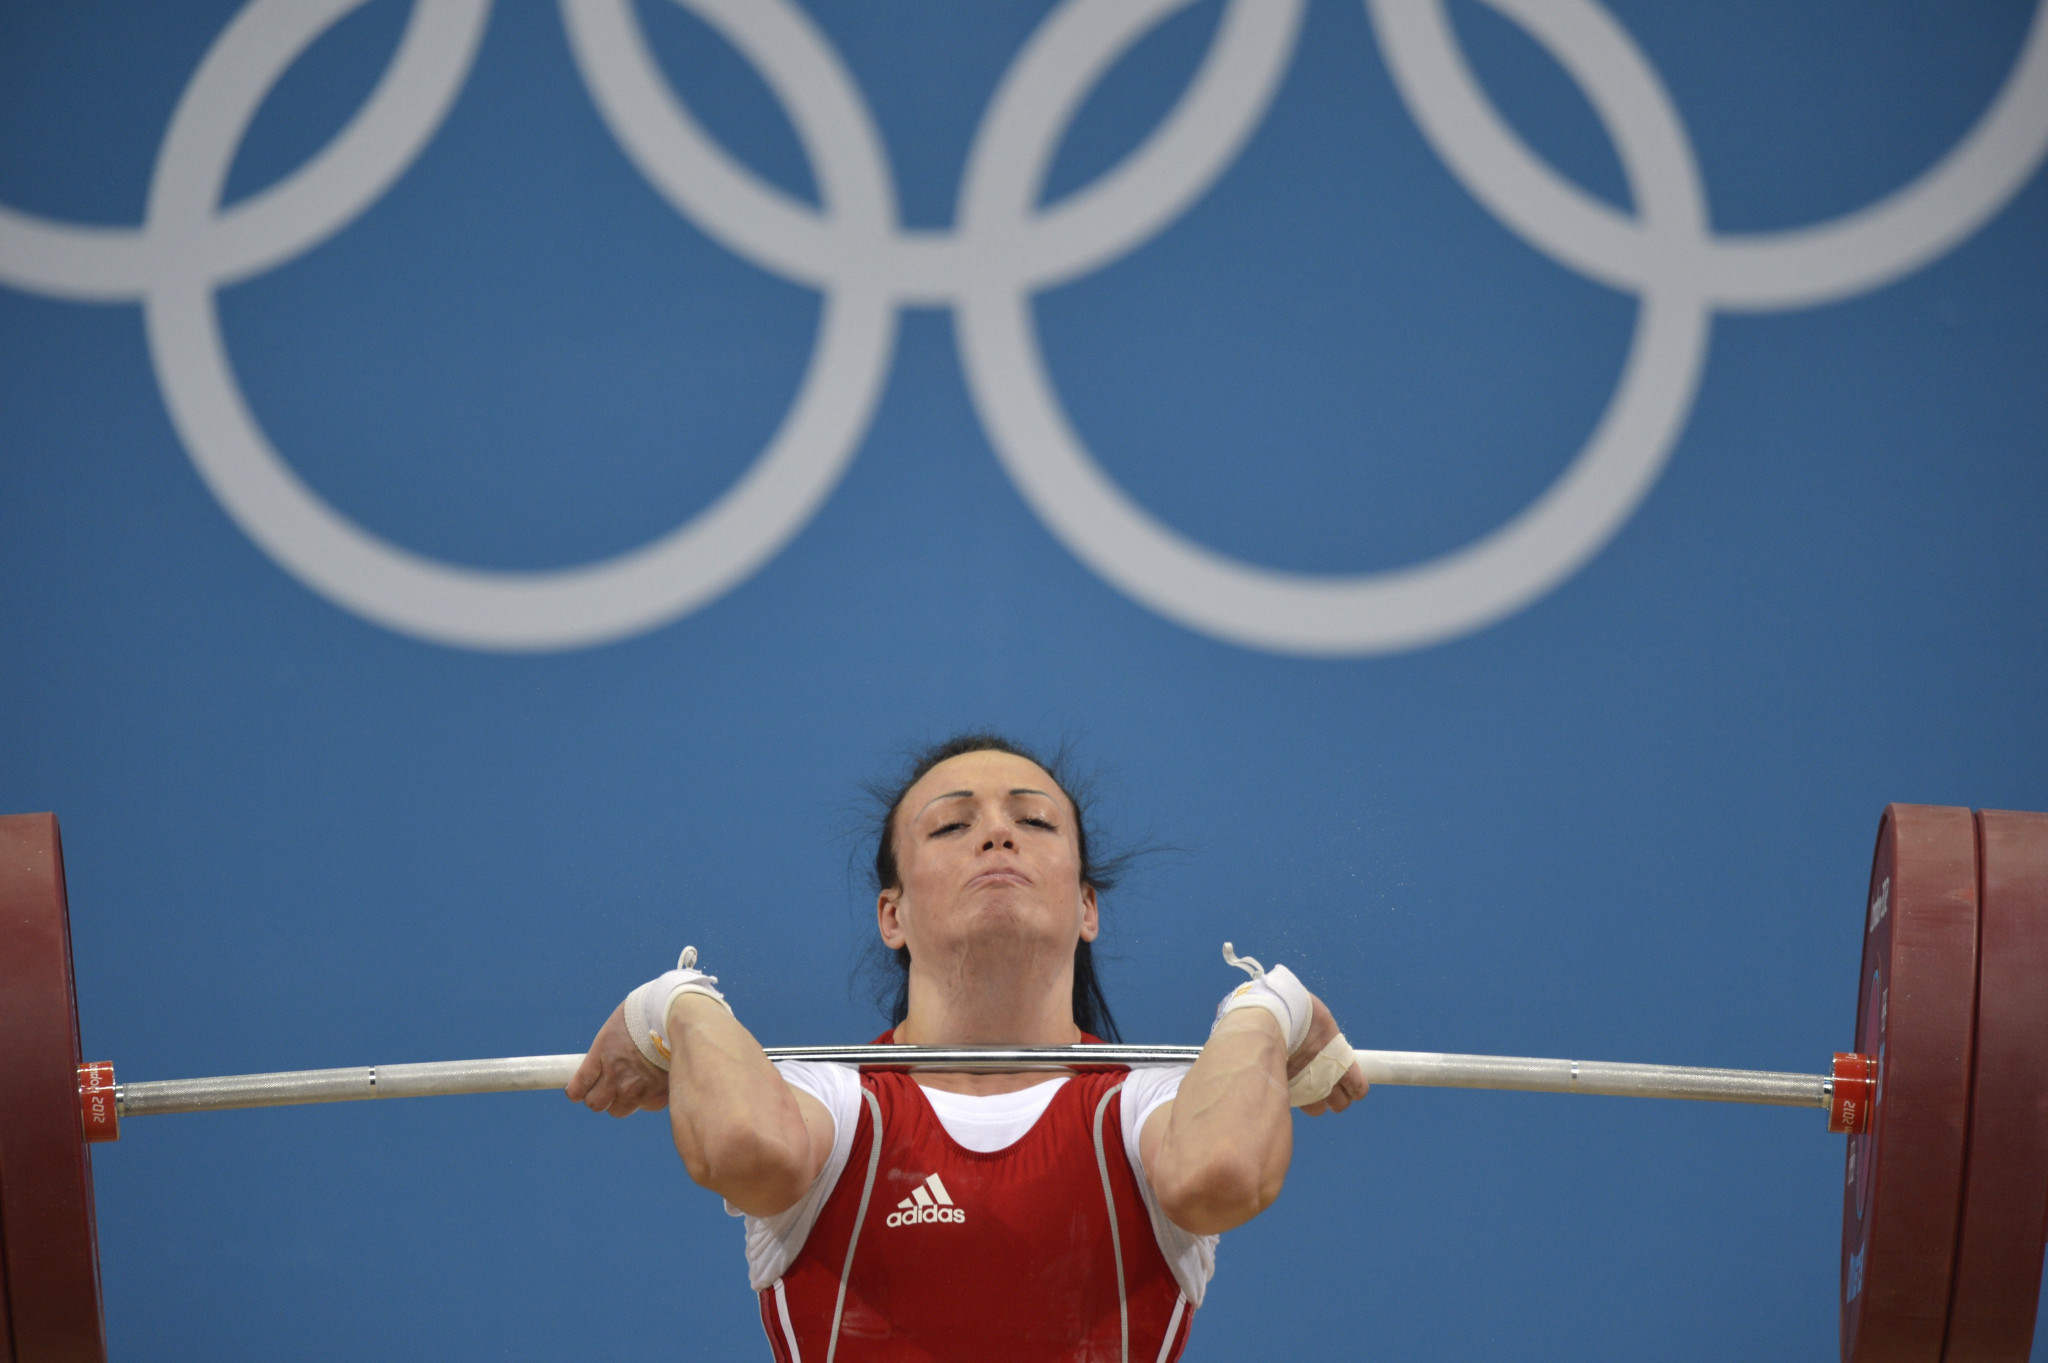 Cristina Iovu has represented three different countries at international level ©Getty Images